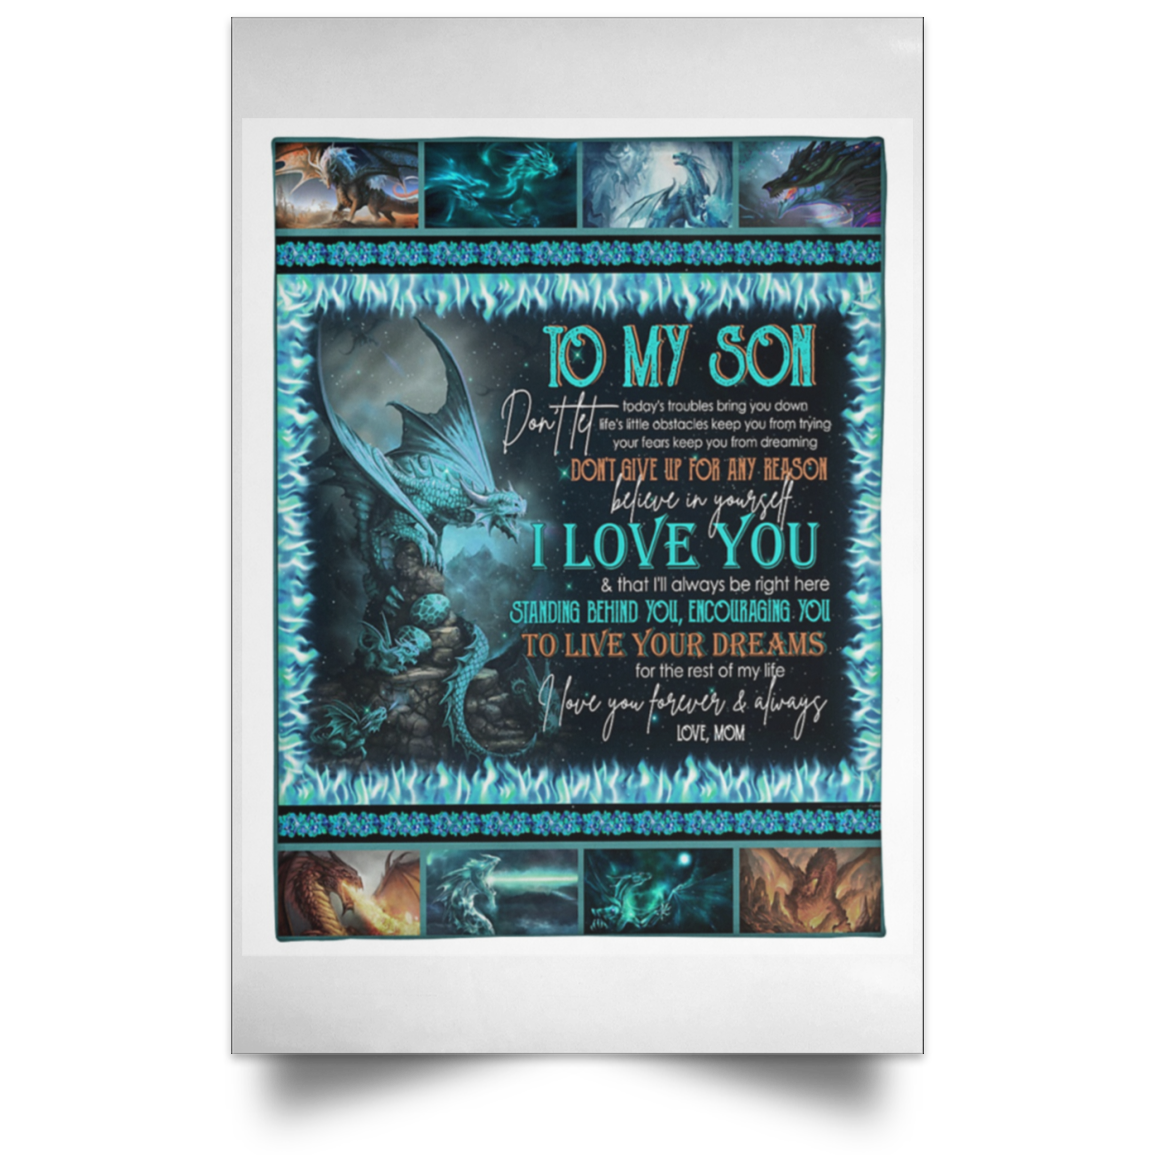 Customed Mom To Son Fleece Blanket Meaningful Gifts On Birthday, Wedding, Anniversary, Awesome Birthday Perfect Happy Birthday Gift Decor Bedroom, Living Room Print High Quality